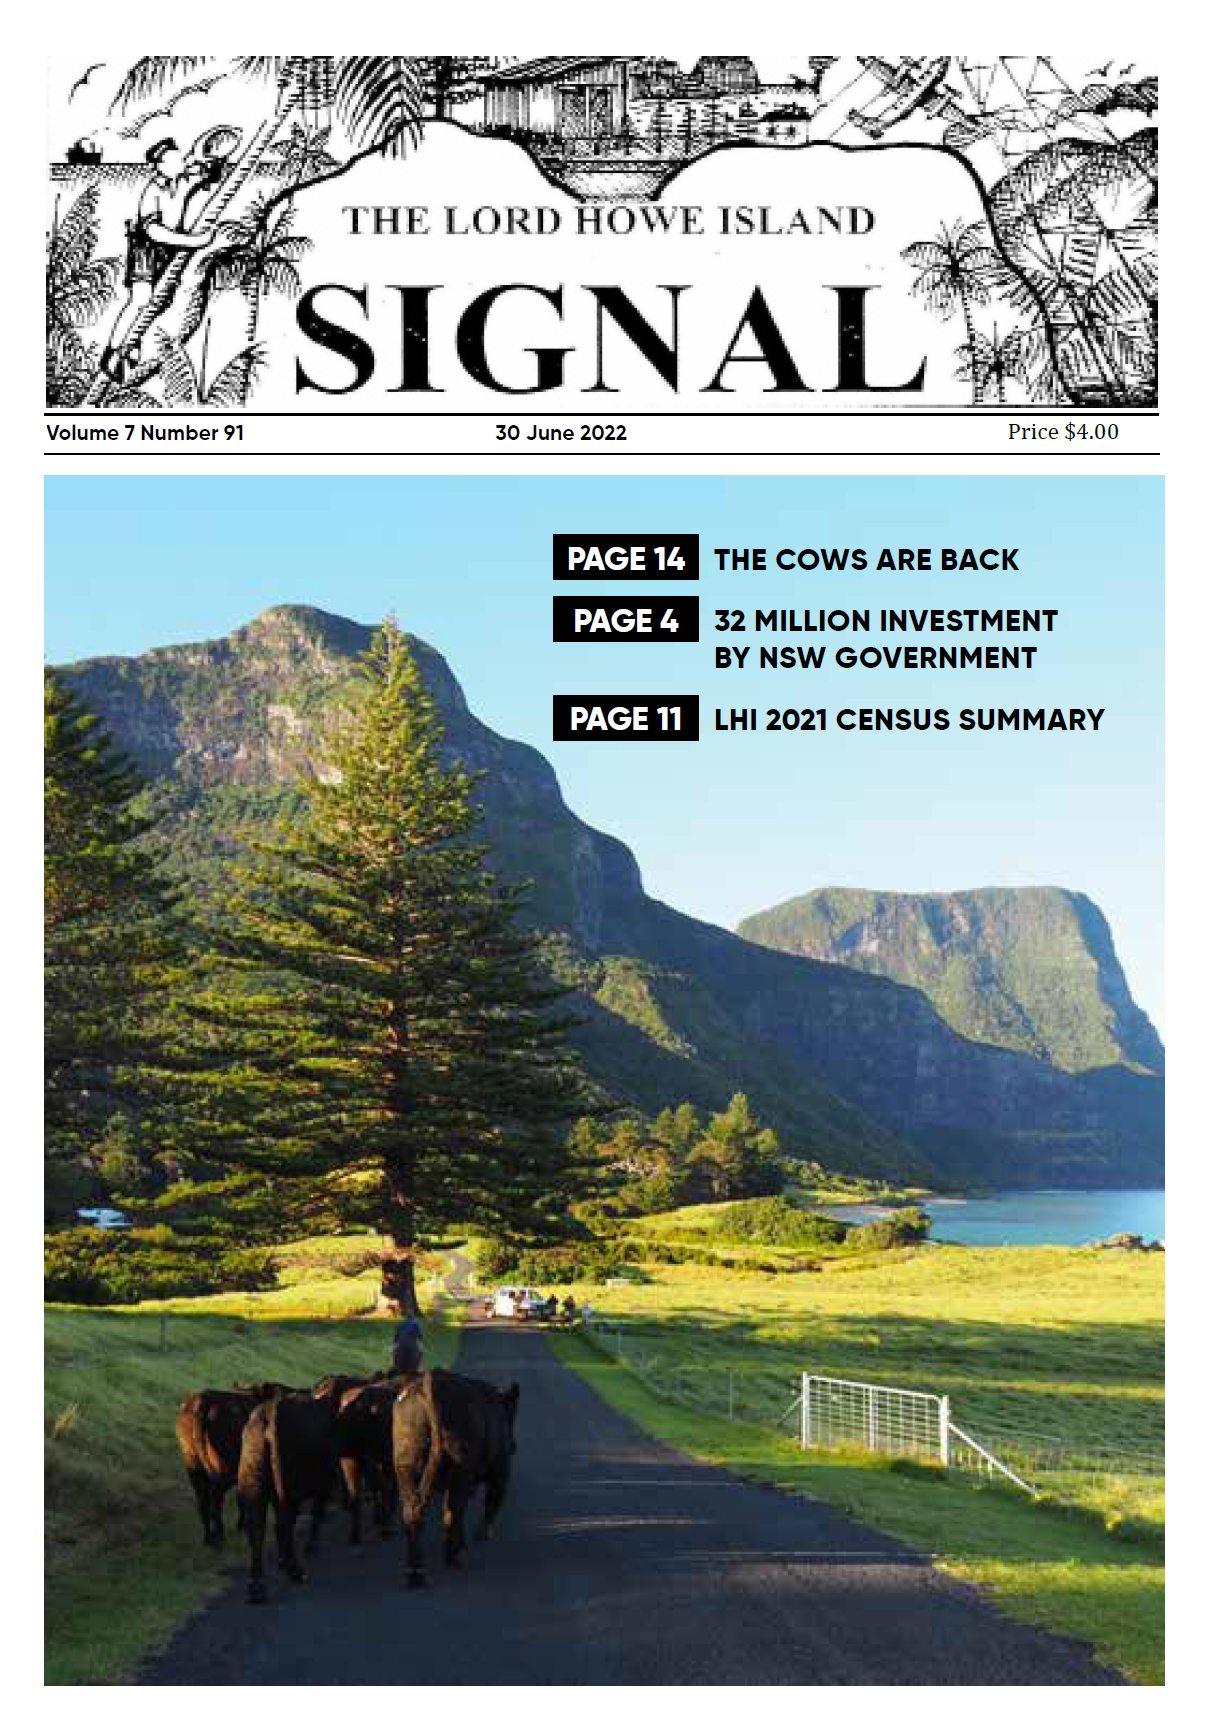 The Lord Howe Island Signal 30 June 2022